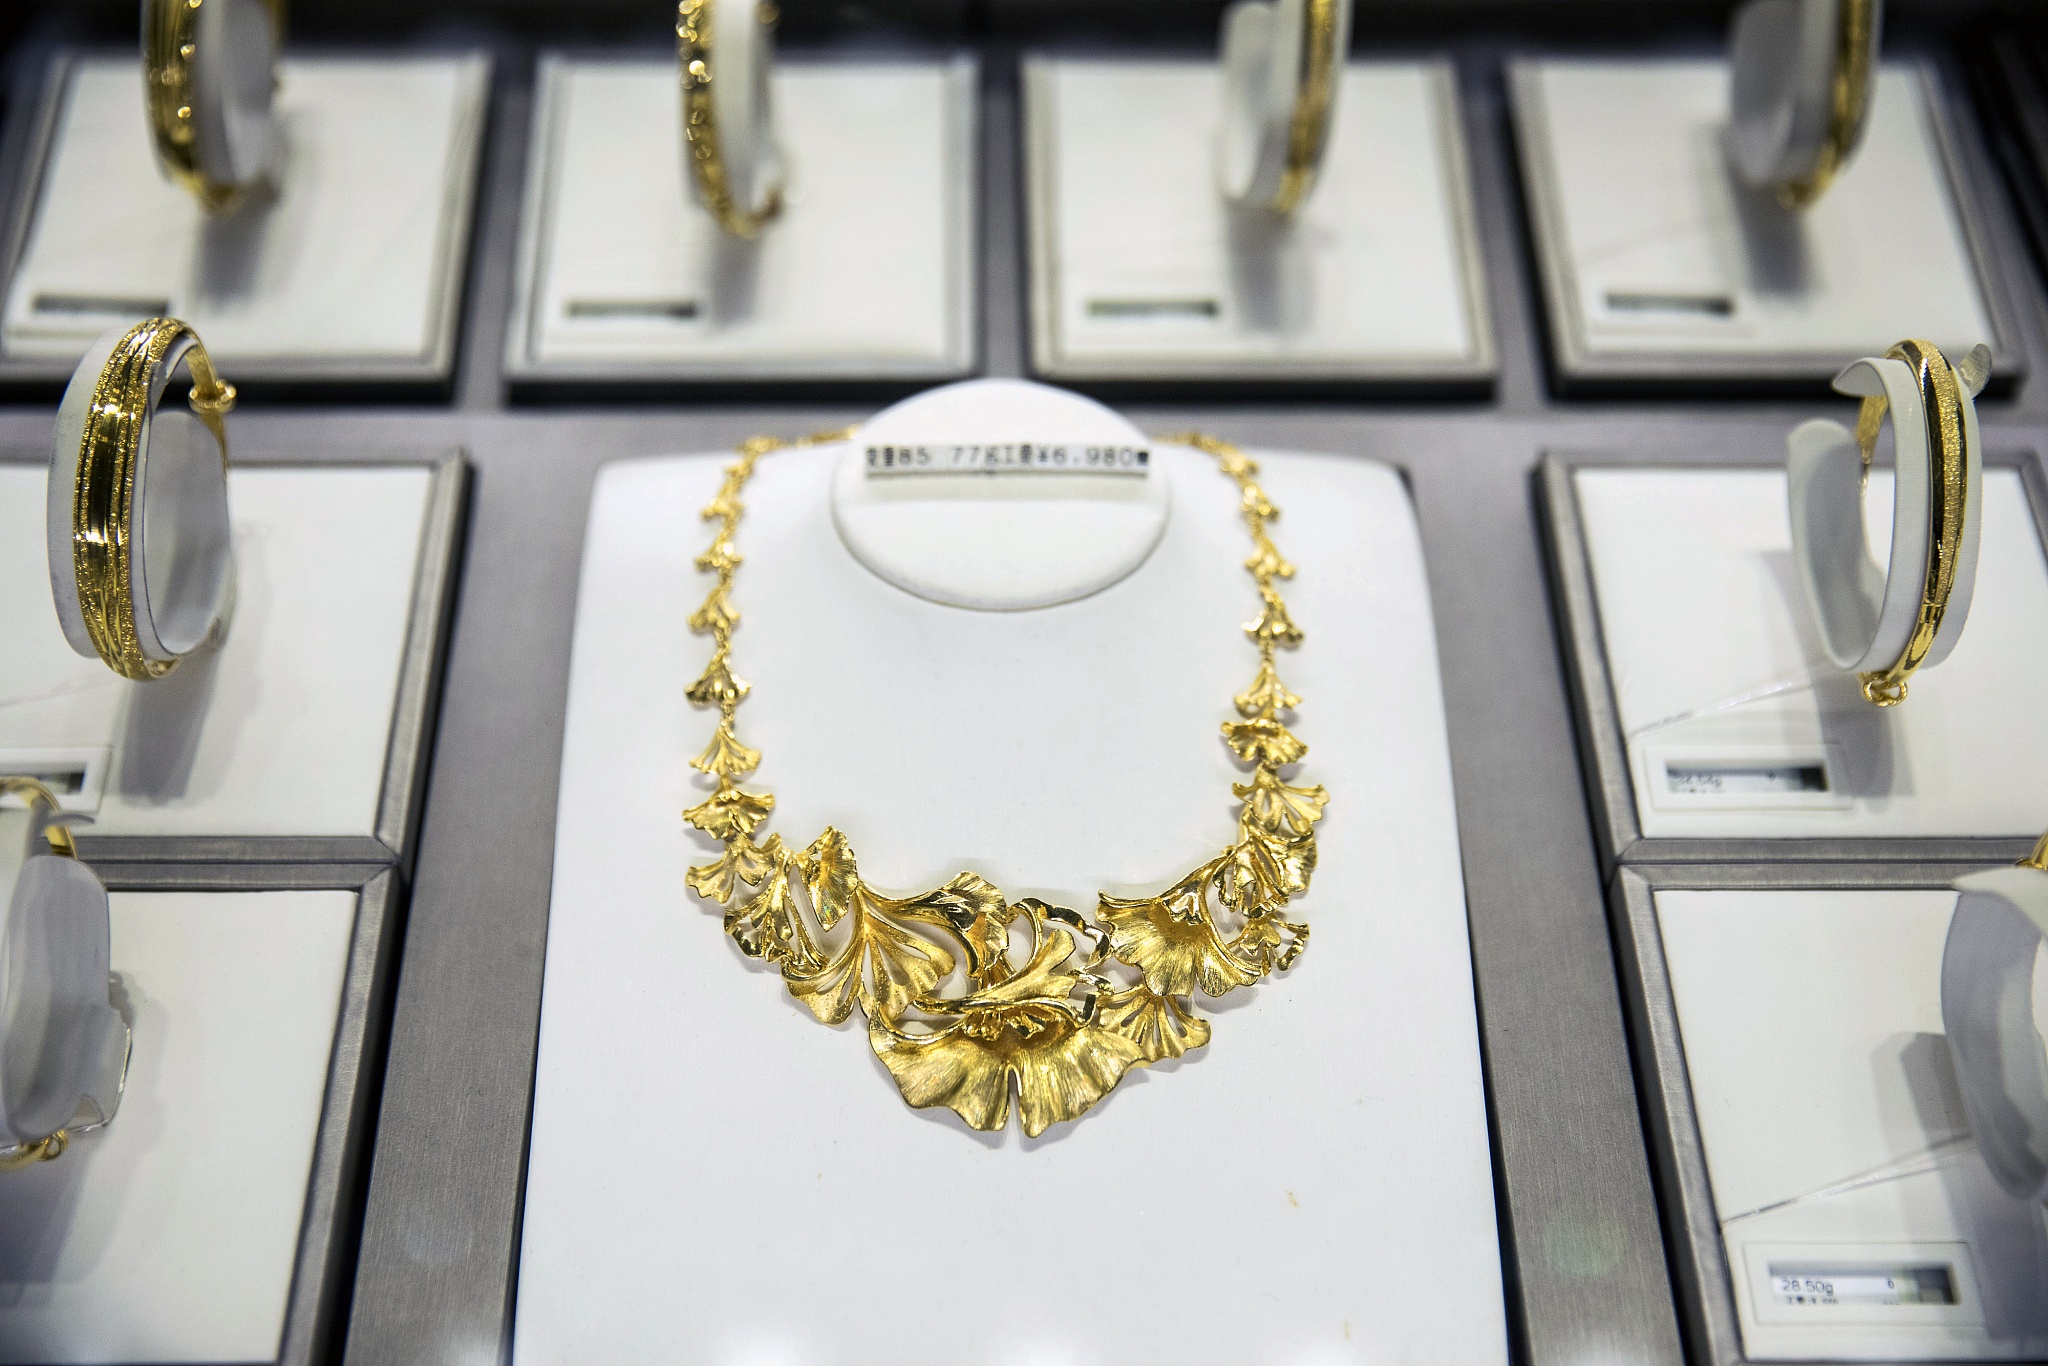 A gold necklace sits on display at a Chow Tai Fook Jewellery Group Ltd. store in Shanghai, China. Photo: VCG Photographer: Qilai Shen/Bloomberg